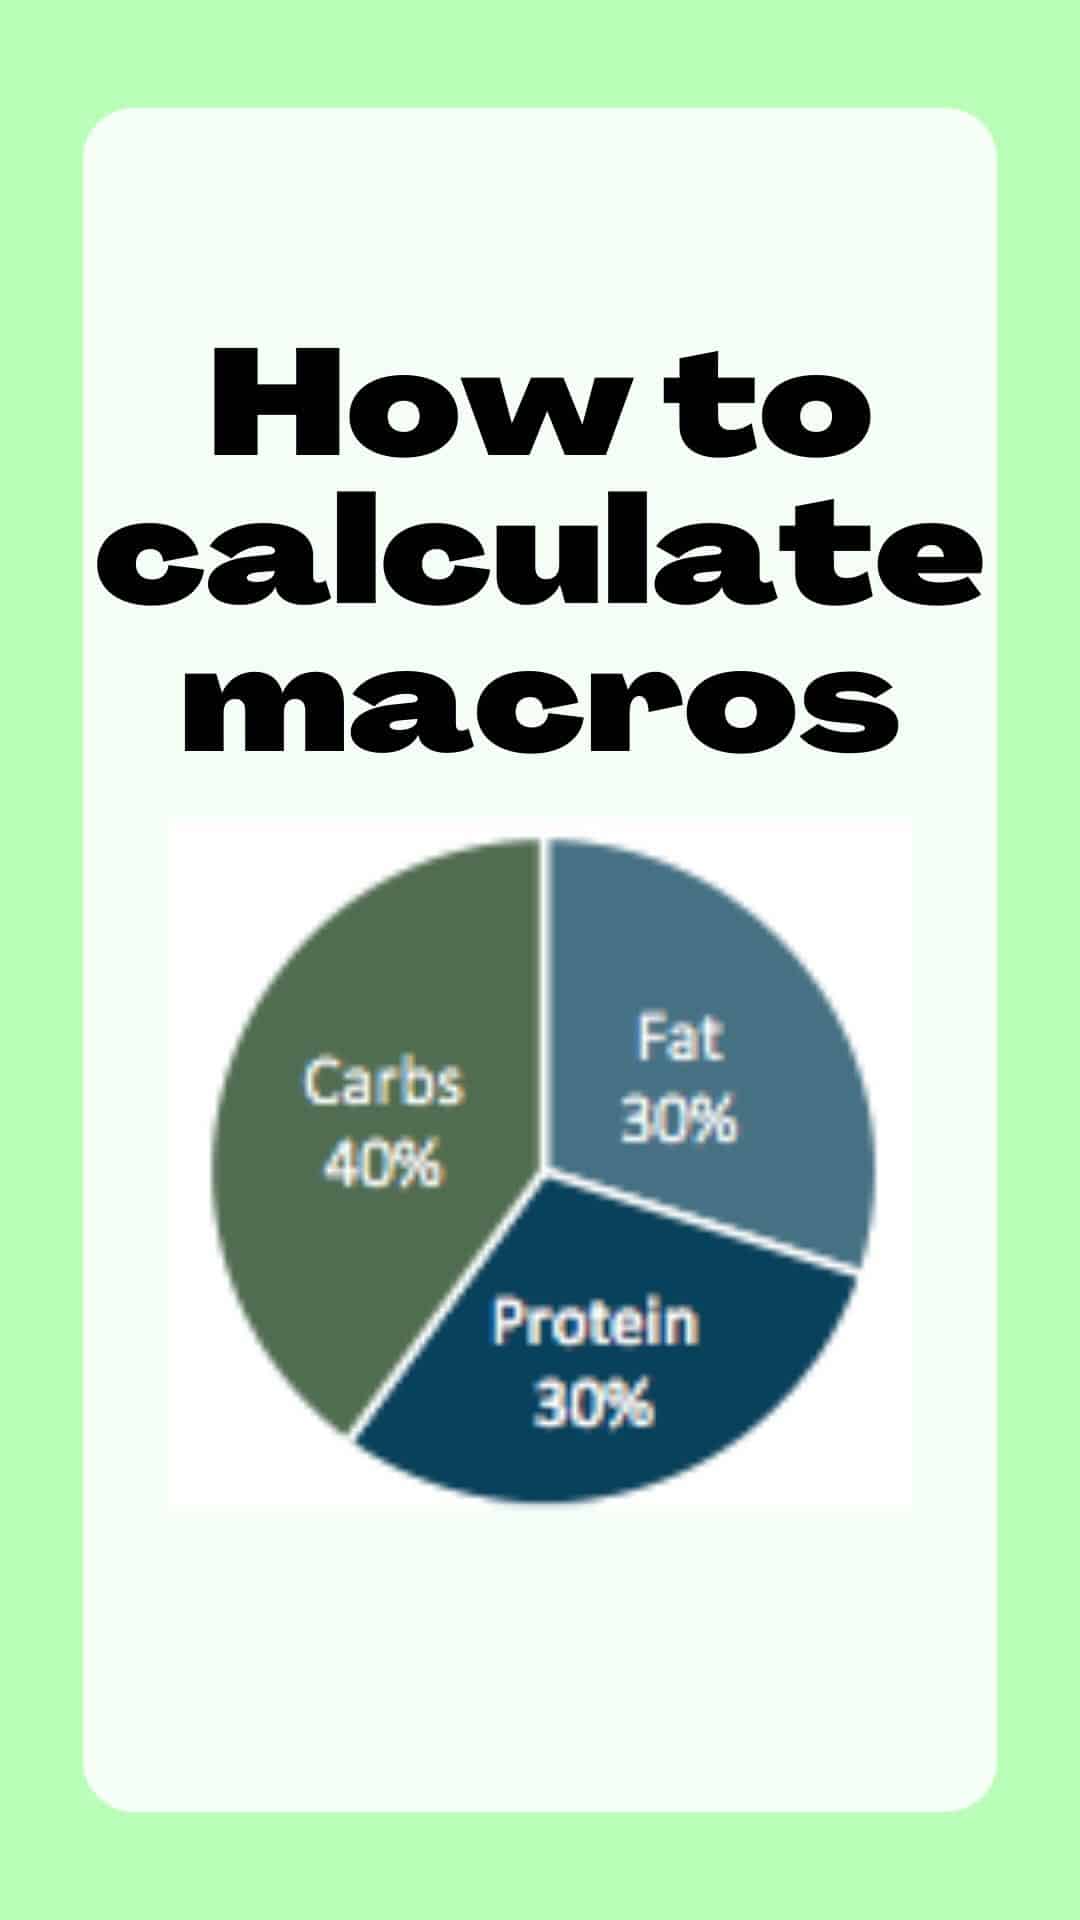 On my Live today, we discussed the importance of calculating macro ratios for your meals to help you eat balanced meals! I made a quick video showing you how to calculate your macros using a free app! Check out my latest YouTube video! Link in bio! #cook2nourish #macros #balancingyourmeals #howtocalculatemacros